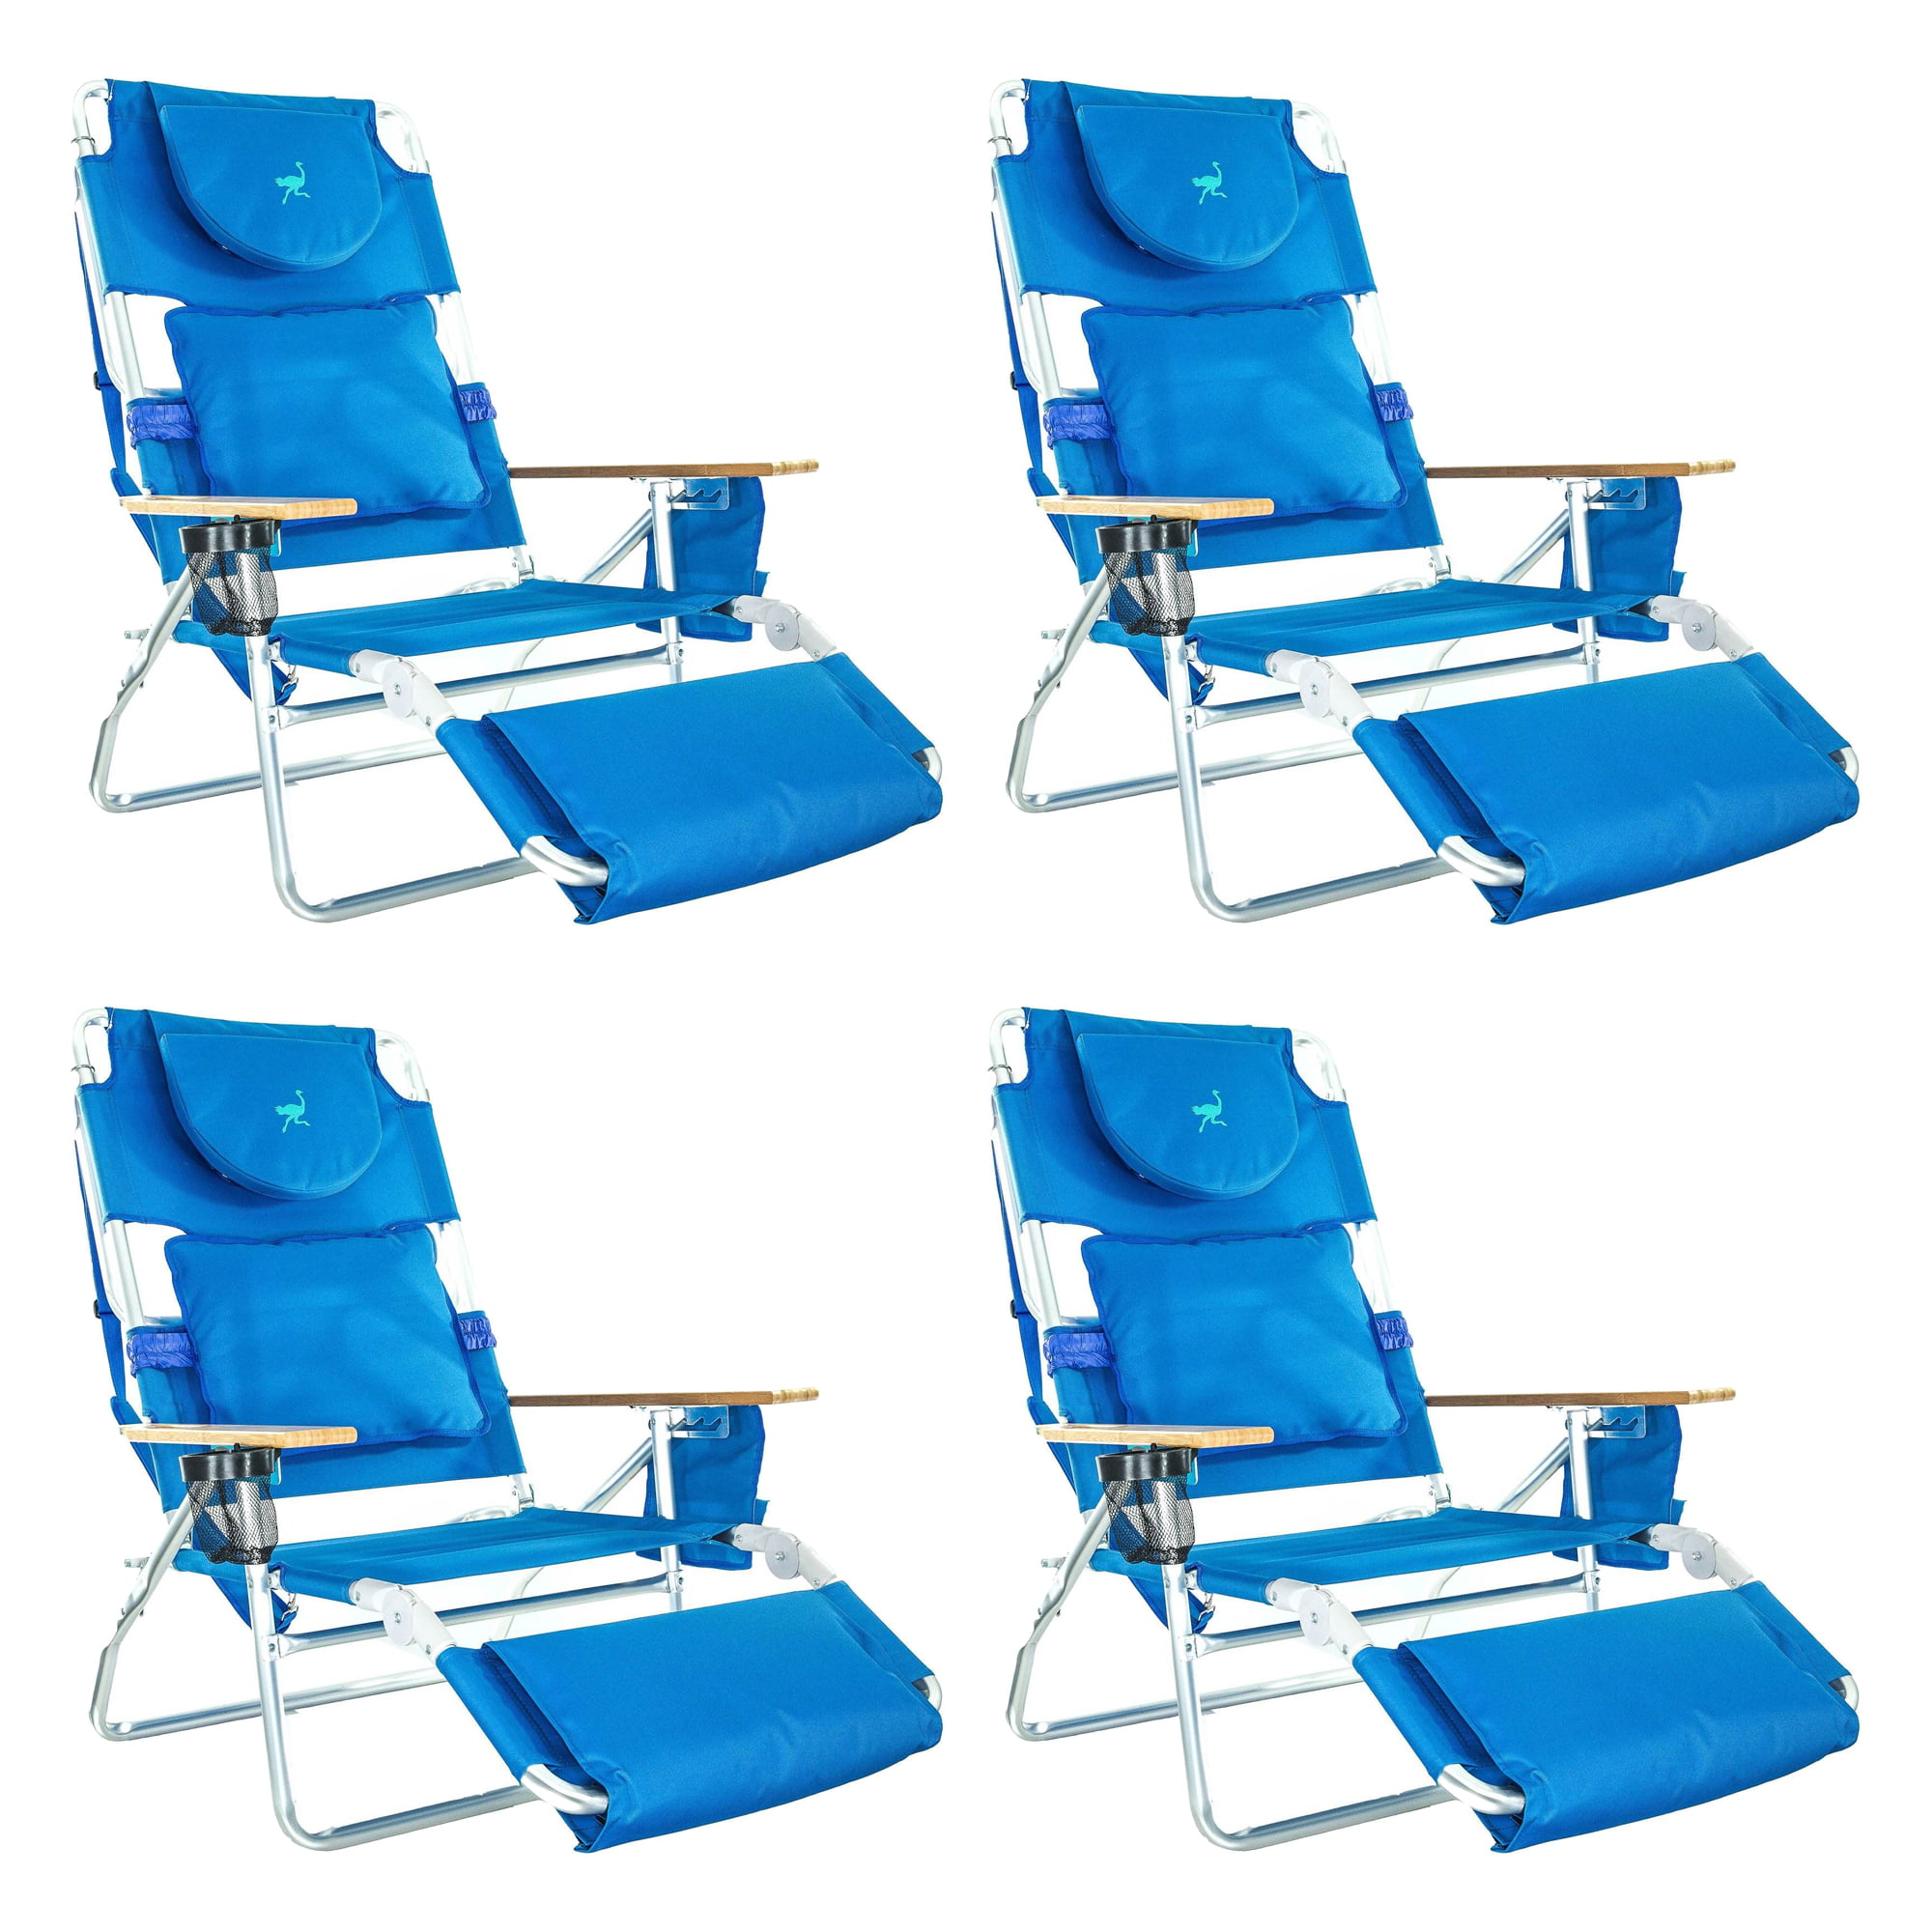 Ostrich Beach Chair Outdoor Tanning Patio 3 in 1 Lounge Folding Padded Blue New 